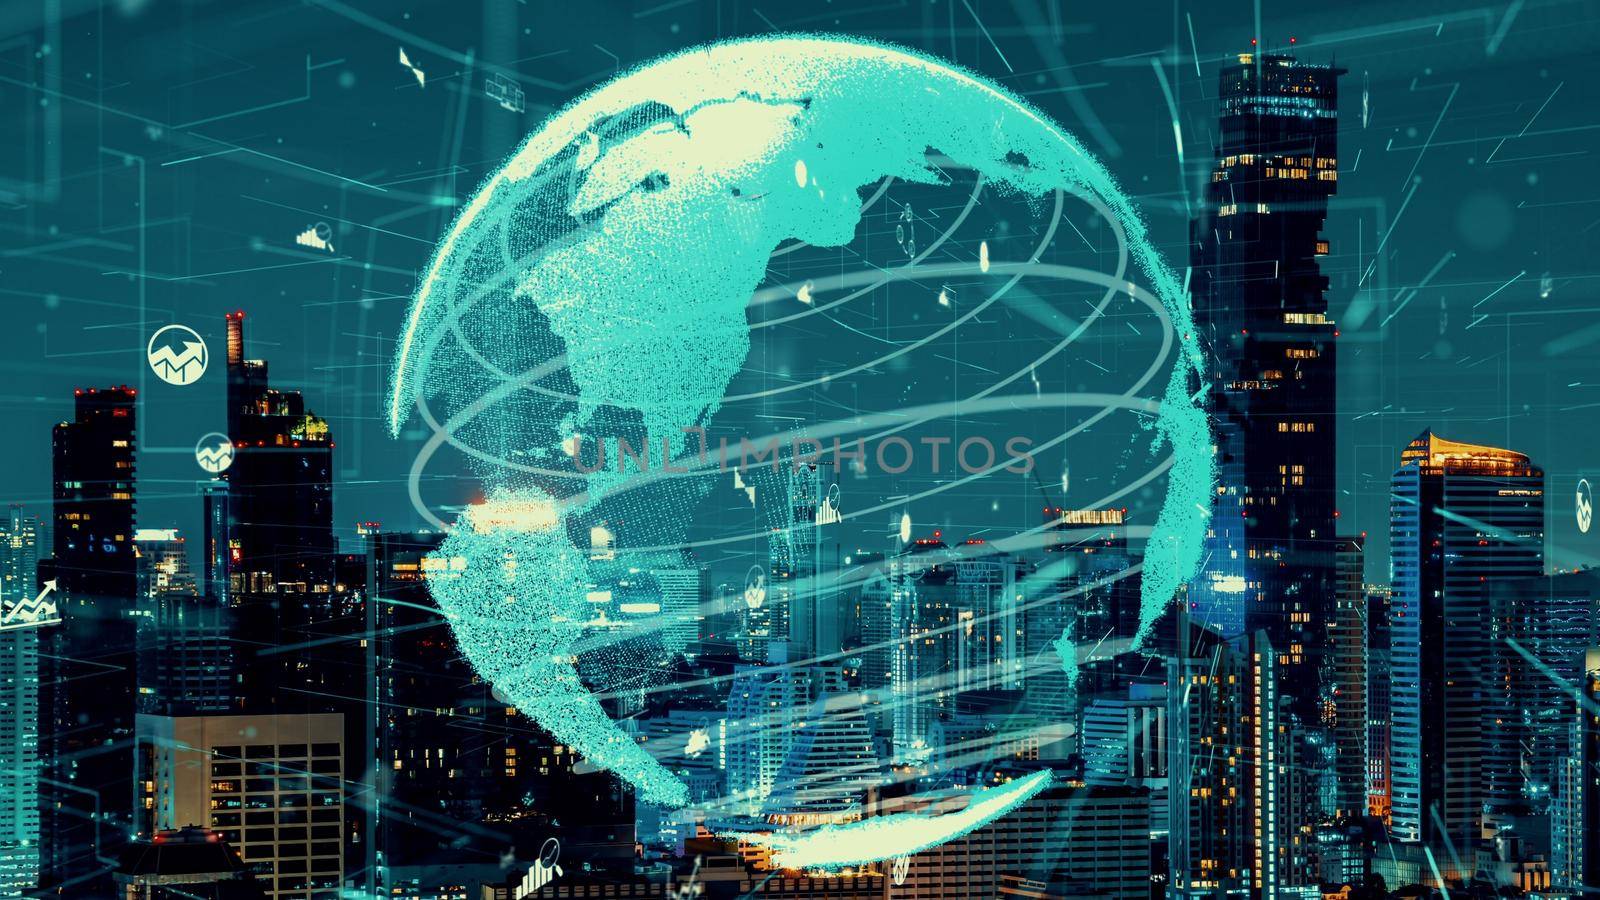 Global connection and the internet network alteration in smart city by biancoblue